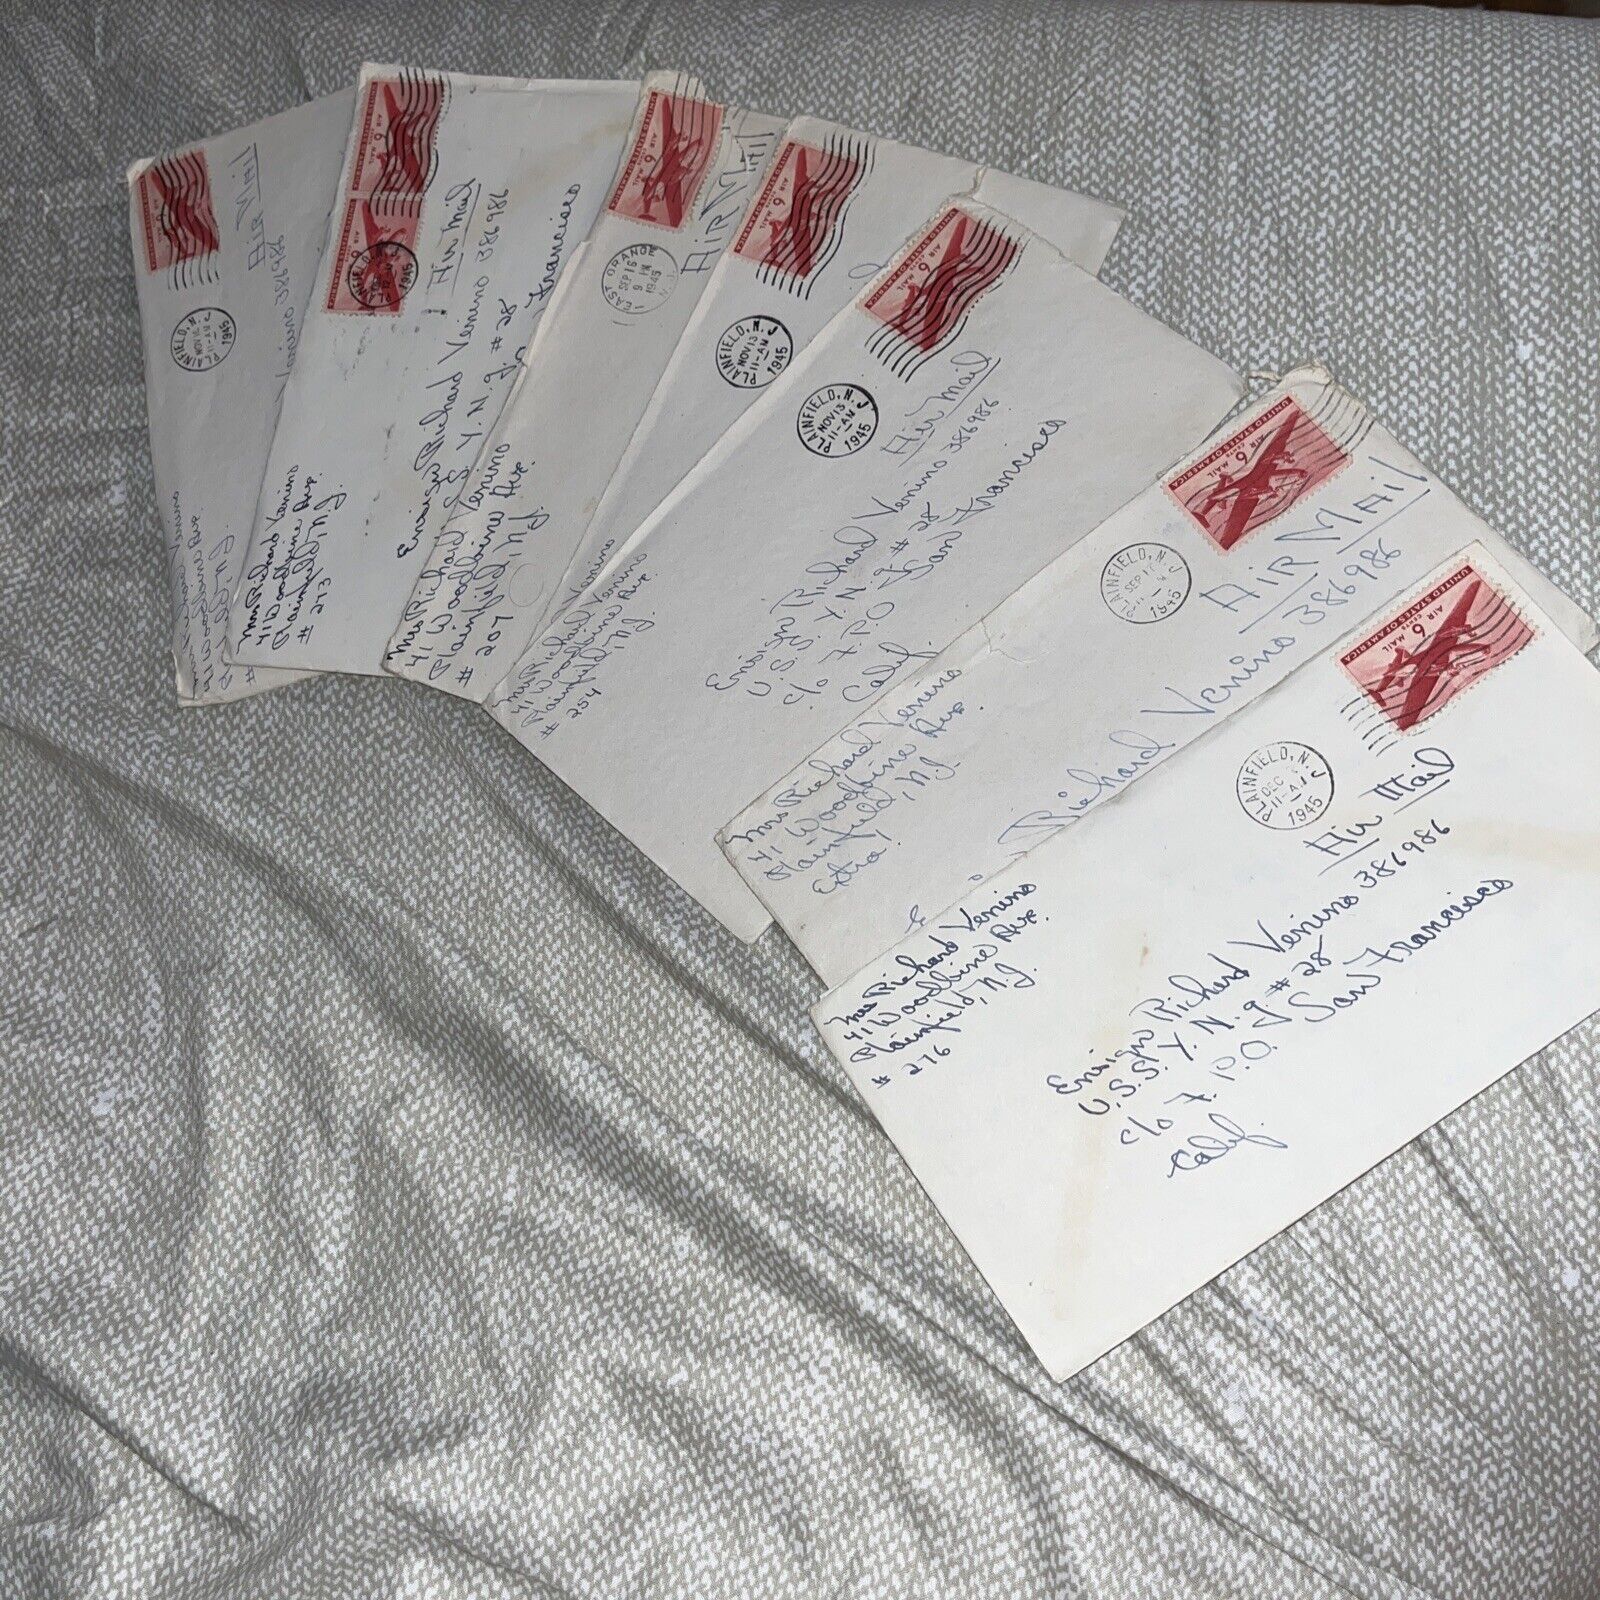 Lot of 7 1945 NJ Navy Wife Love Letters to USS Nutmeg Ensign After War Ends WWII